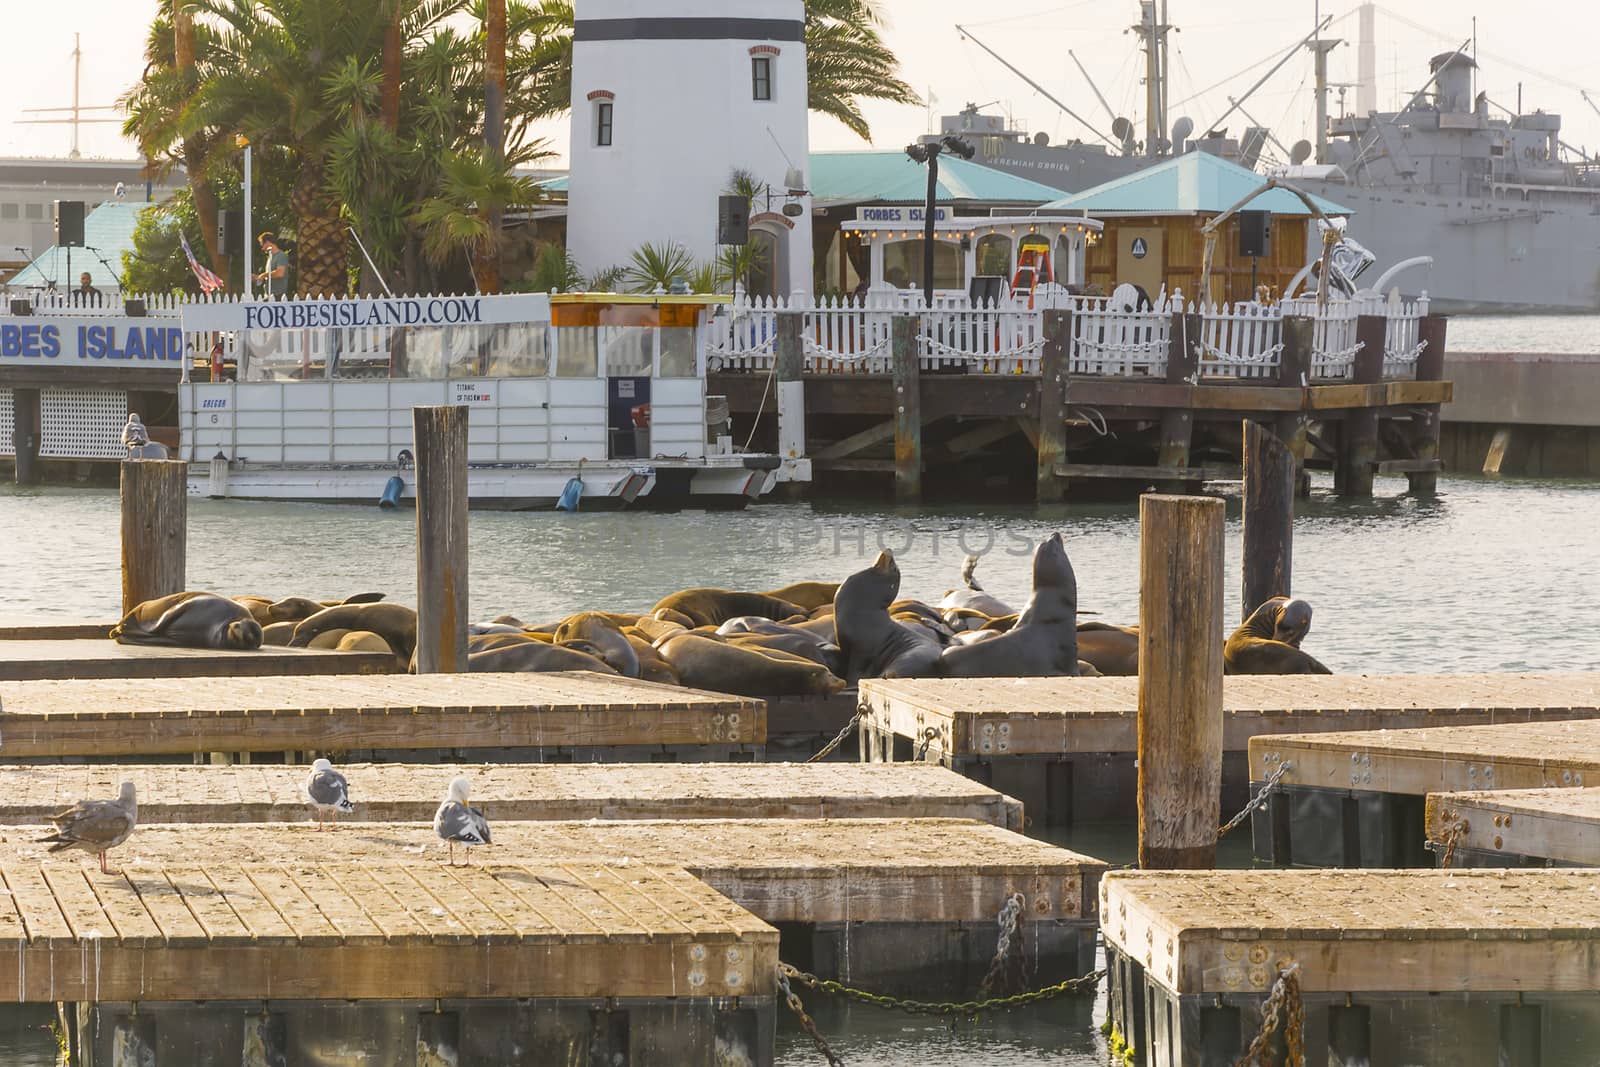 San Francisco, CA, USA, October 23, 2016: The well-known Pier 39 in San Francisco with sea lions. Animals are heated on wooden platforms